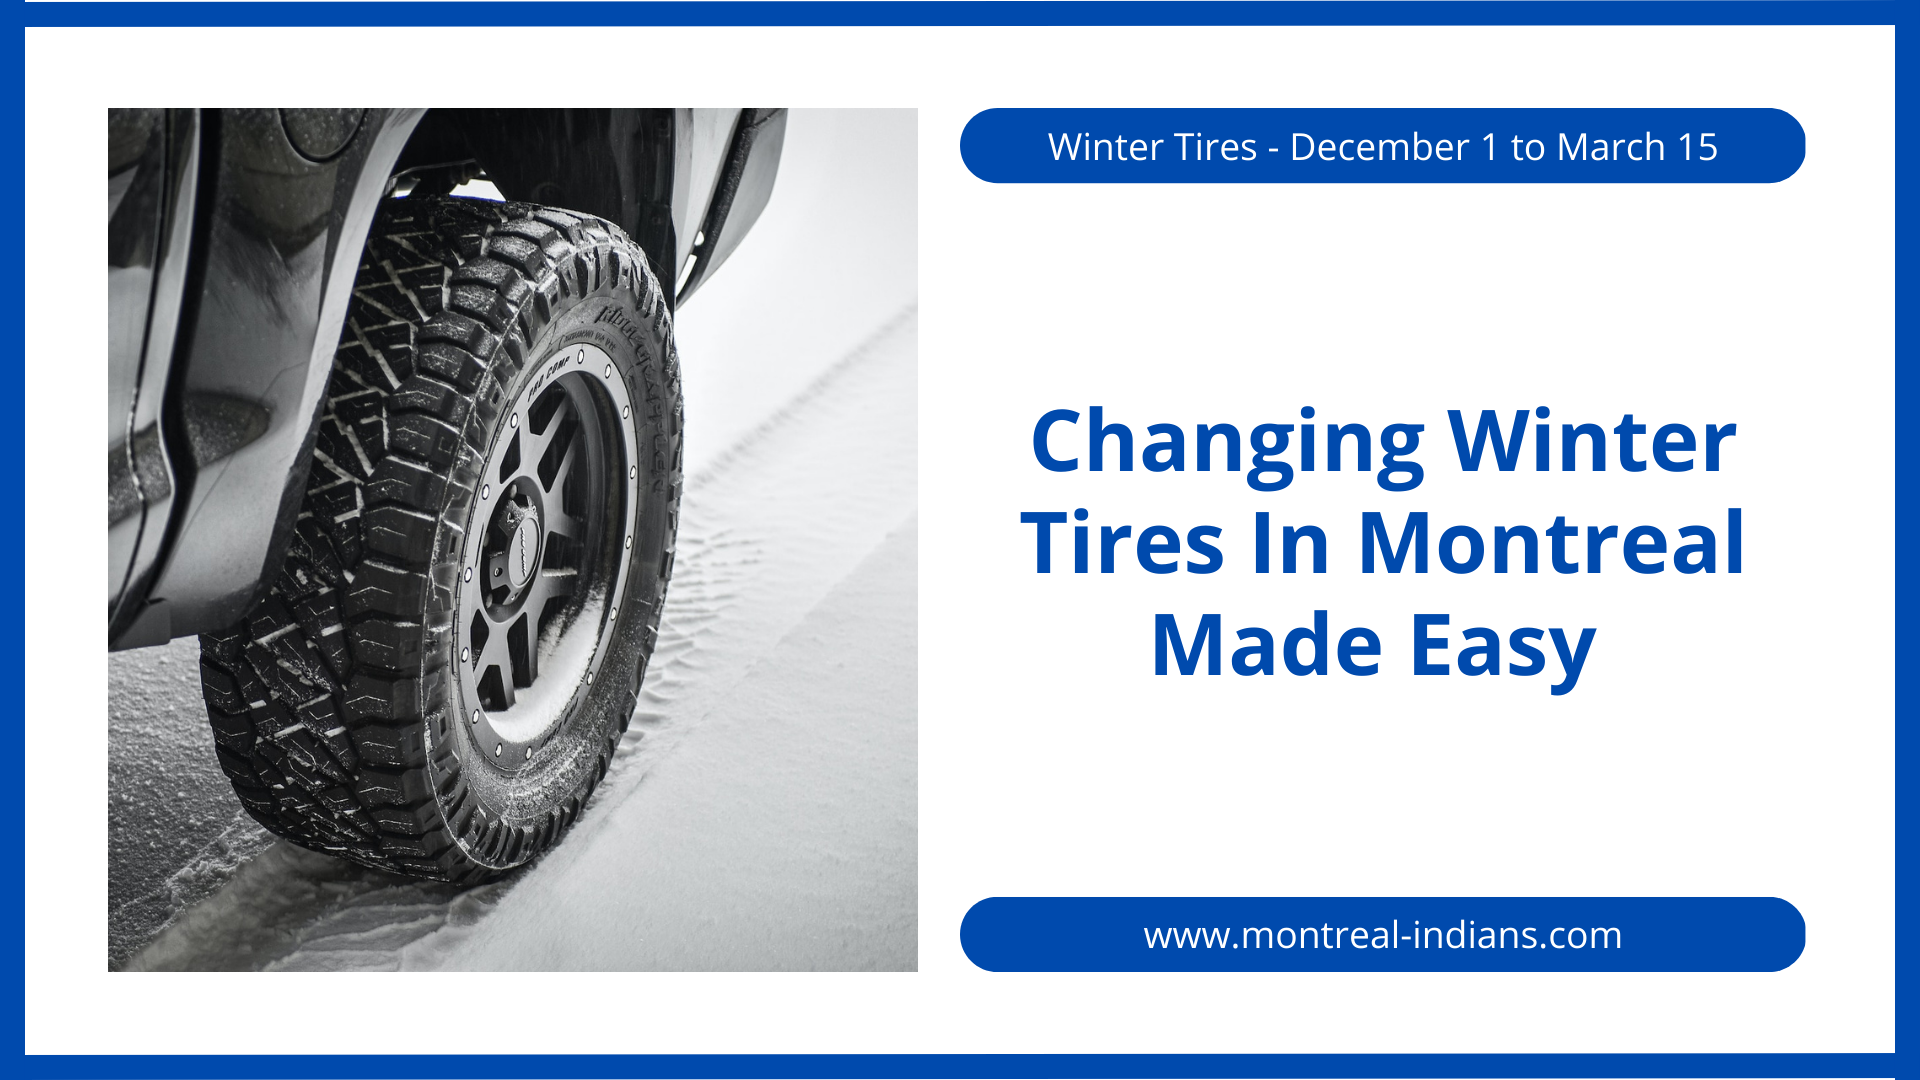 how, when and why to change winter tires